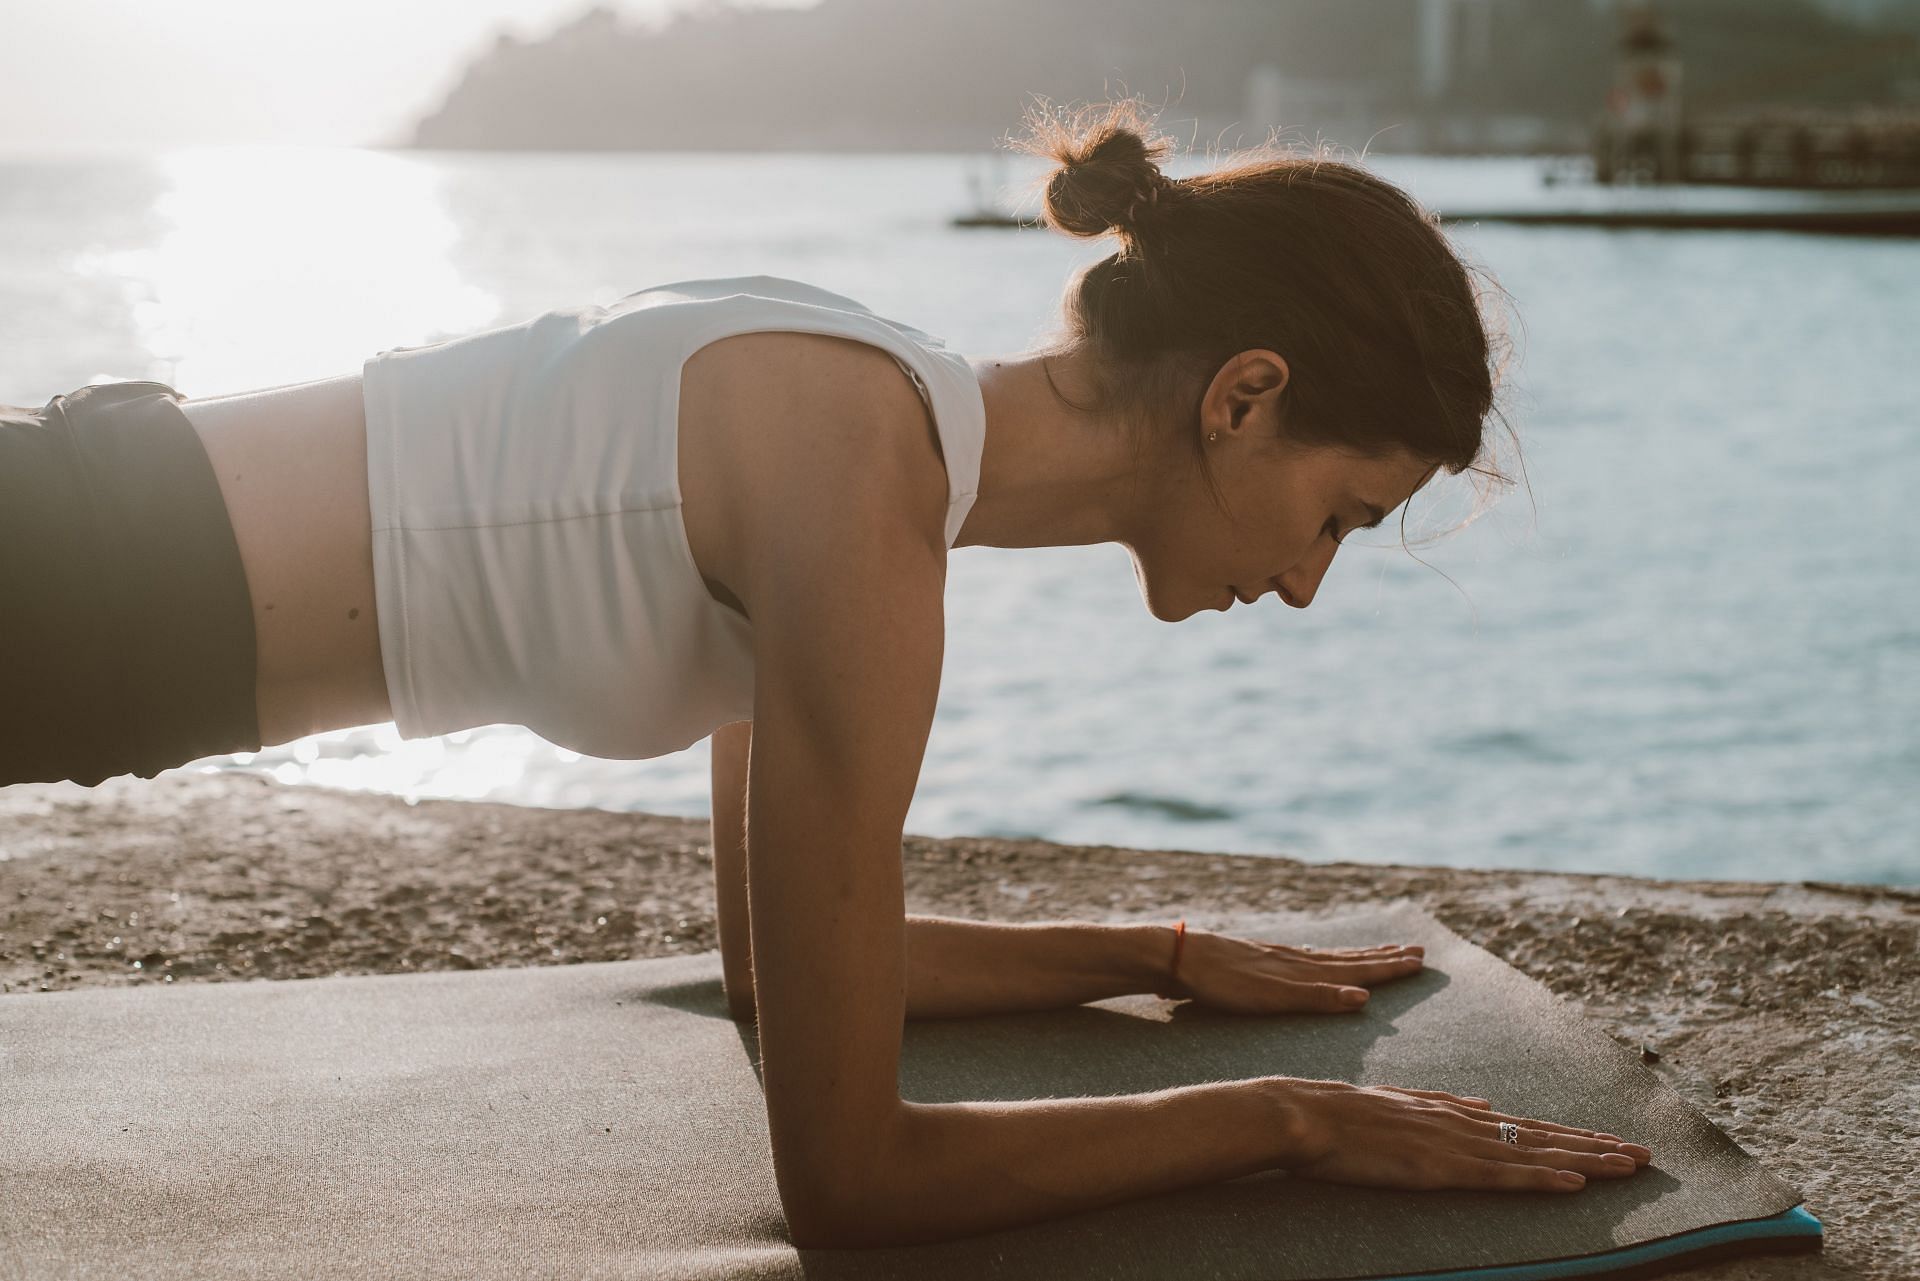 Incorporating yoga in your routine can help you feel grounded. (Image via Pexels /  Roman Odintsov)